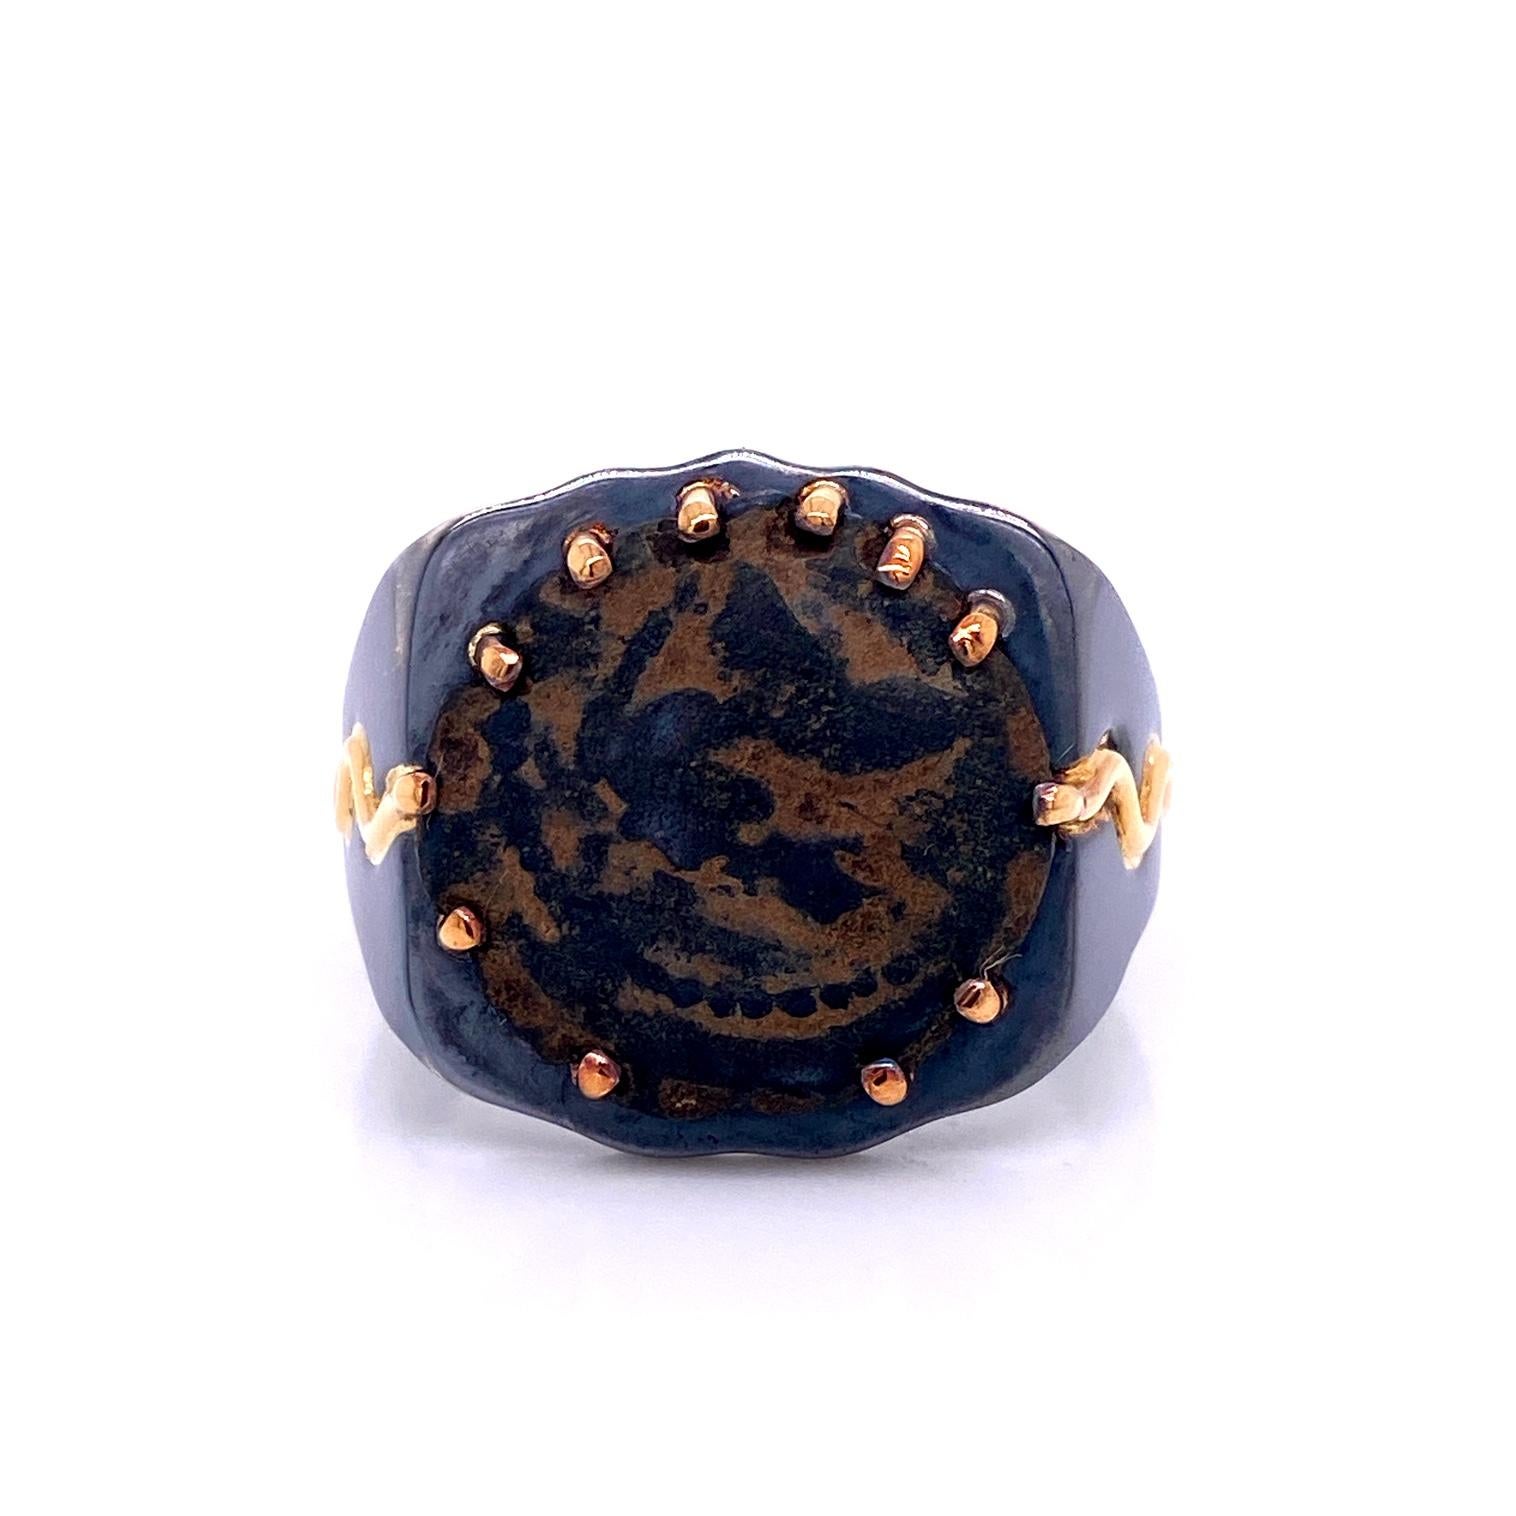 An 18k yellow gold and oxidized sterling silver men's ring set with an Ancient Roman Coin. Ring size 10.5. This ring was made and designed by llyn strong.